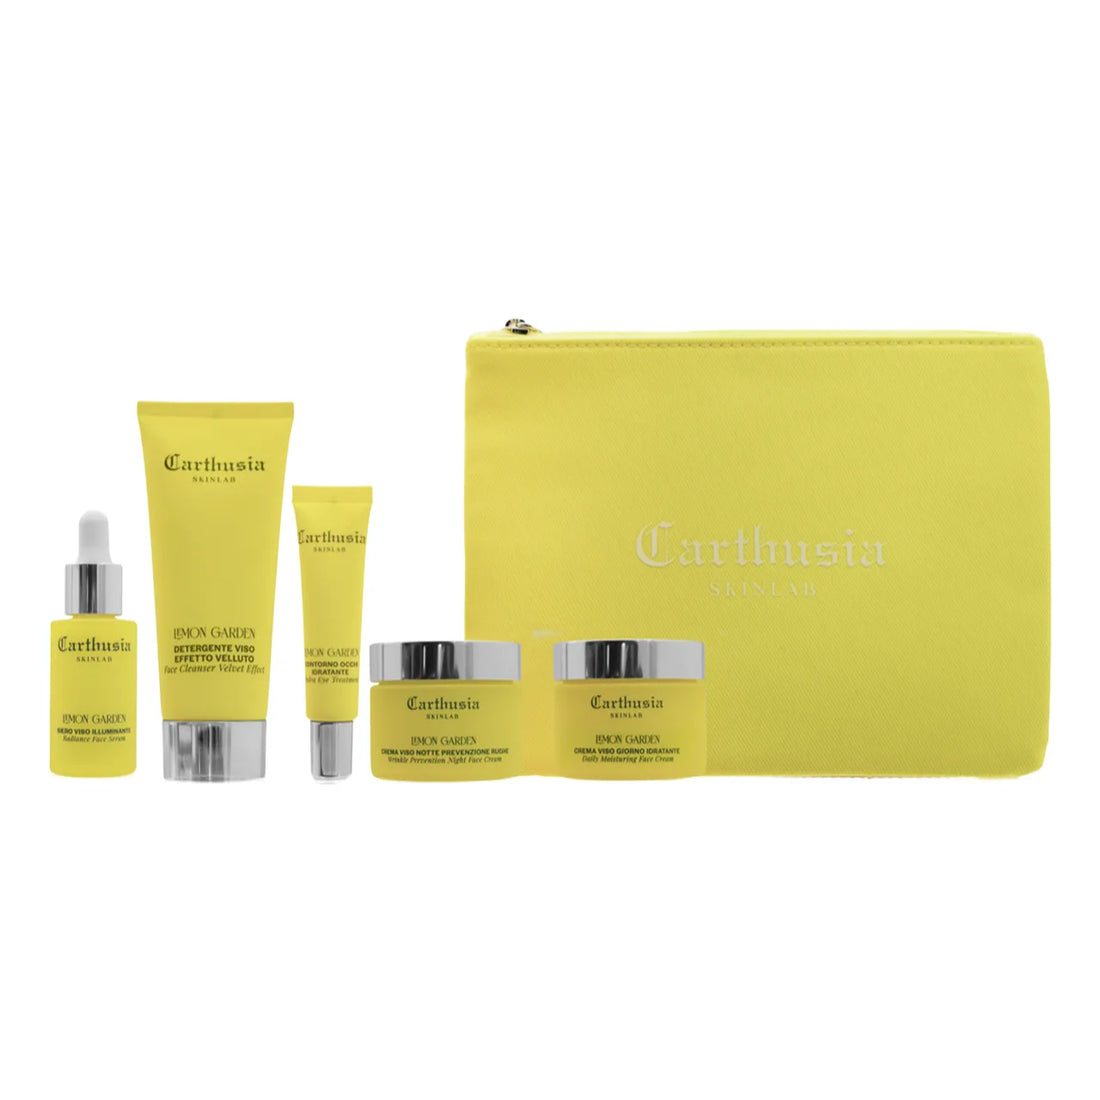 Carthusia Lemon Garden SkinLab Travel Clutch 5 promotion products